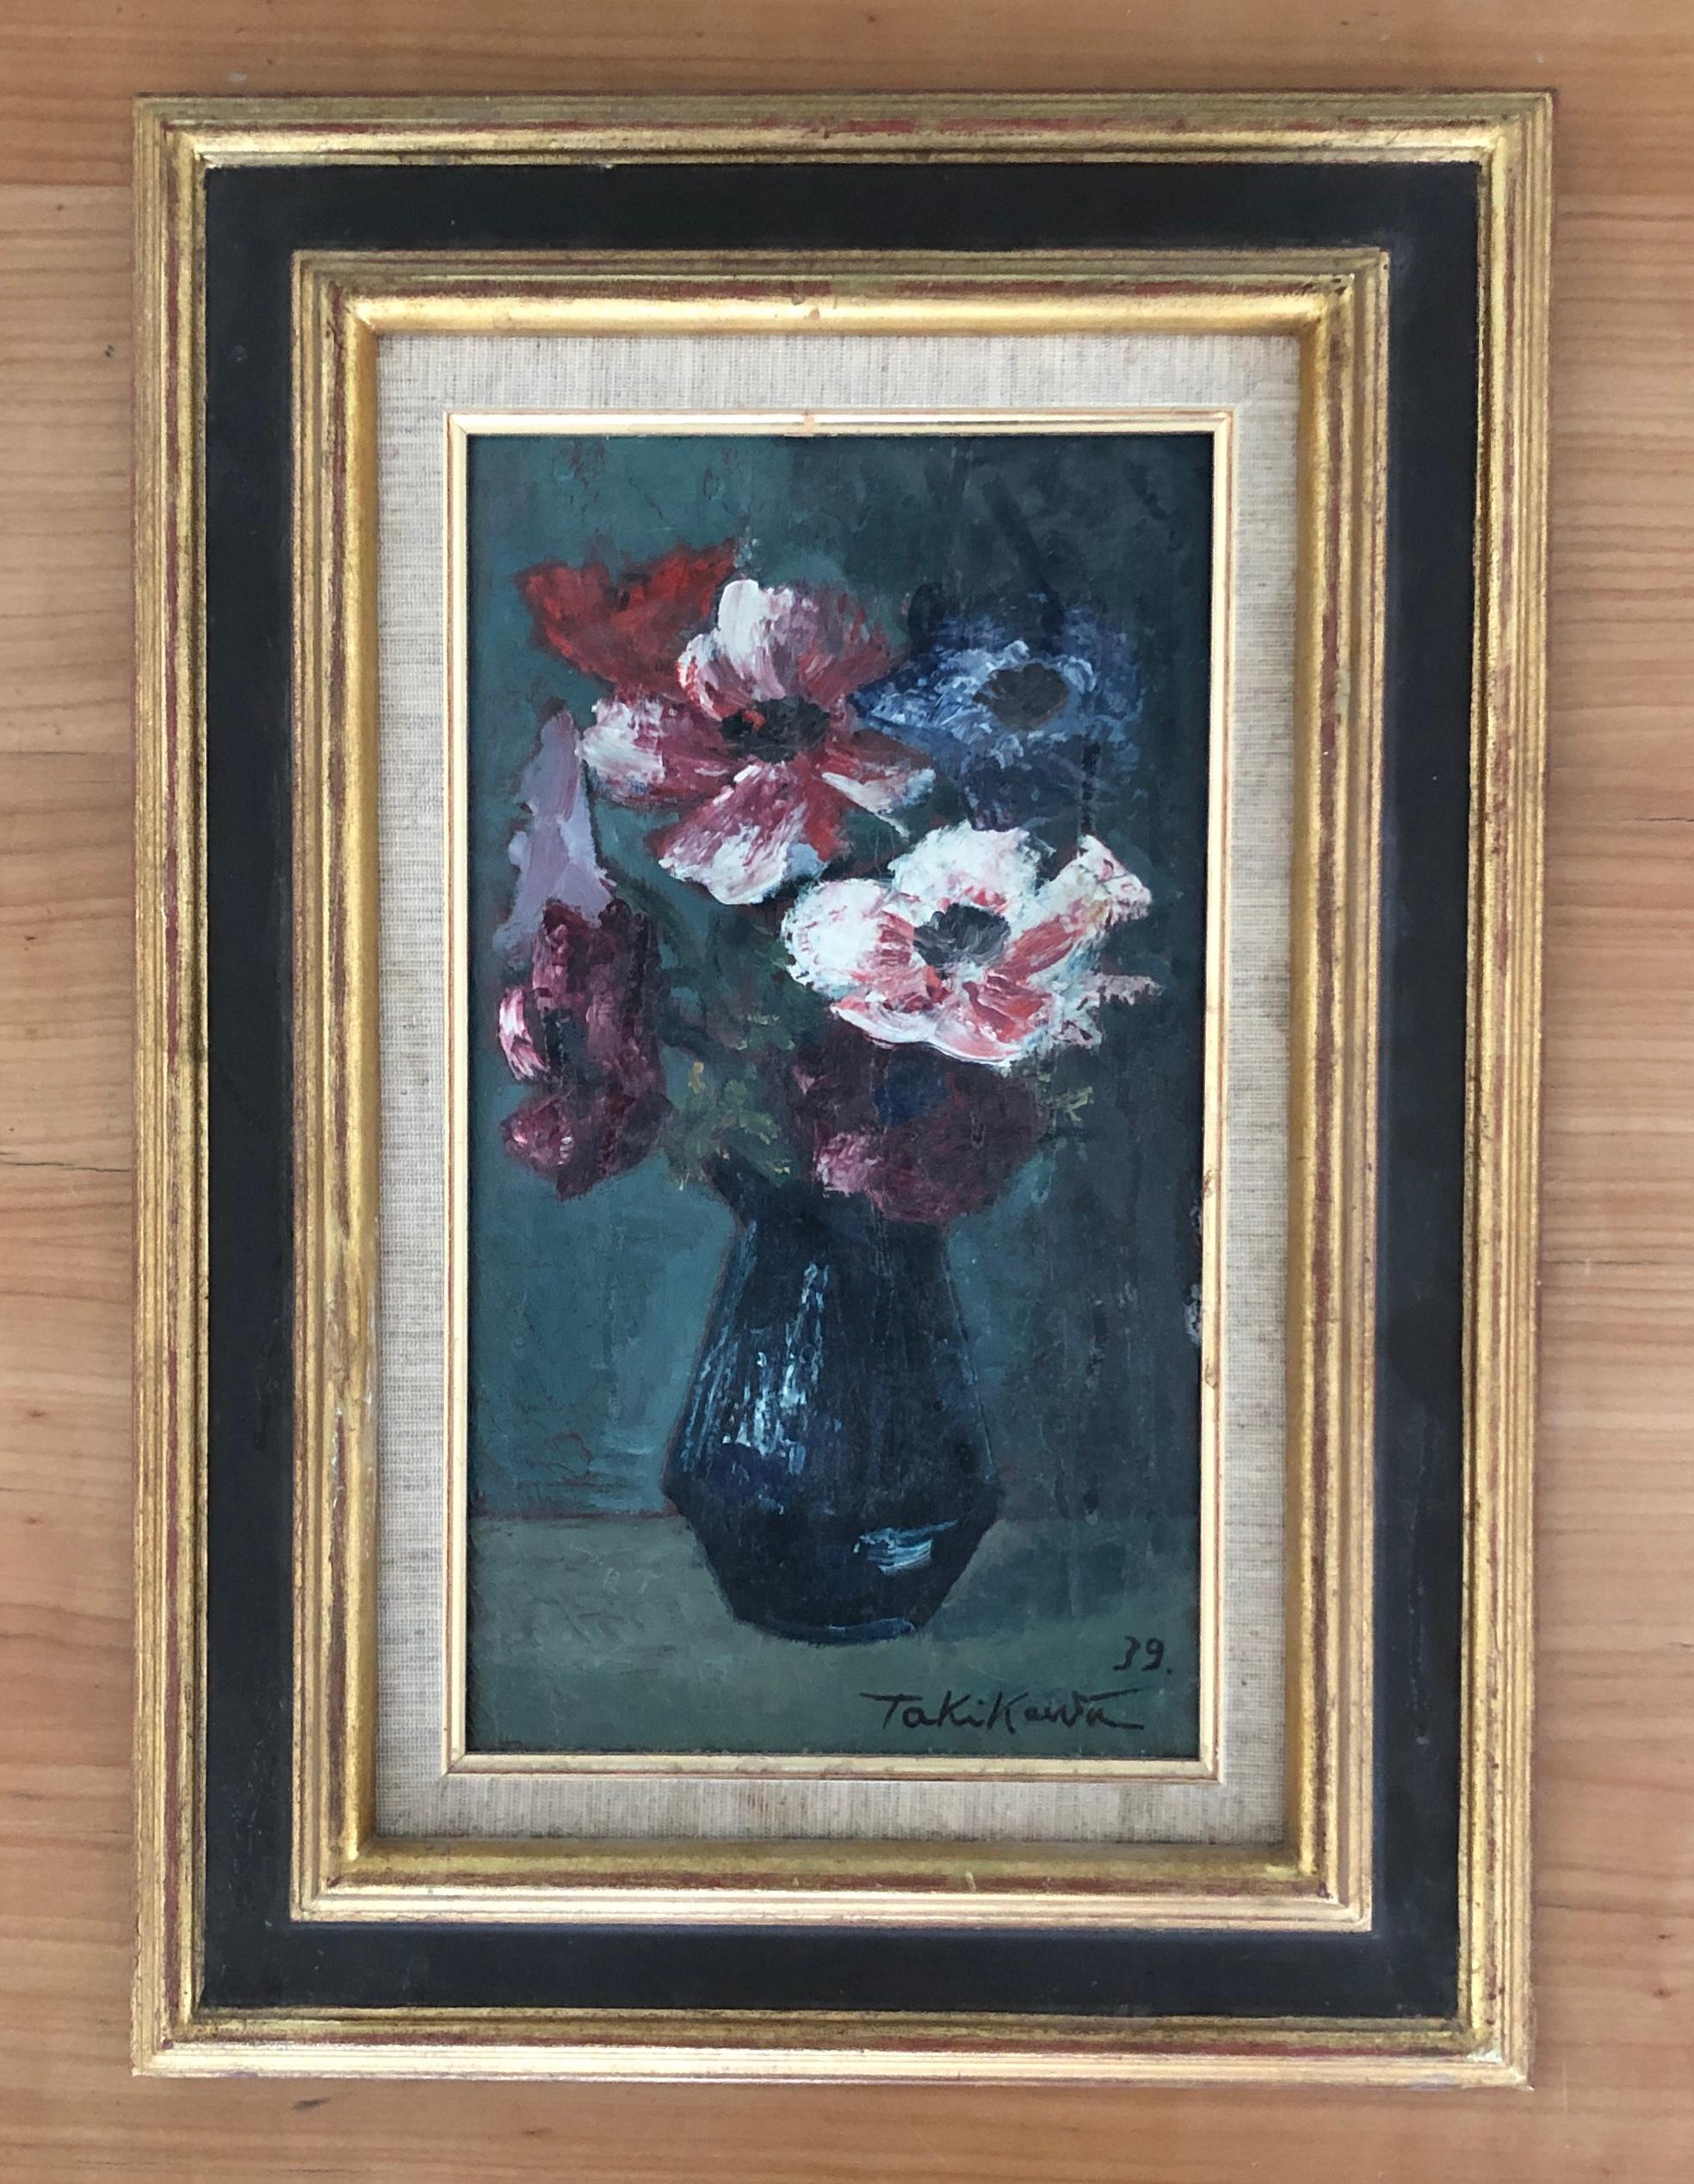 Bouquet of flowers in vase - Painting by Takikawa